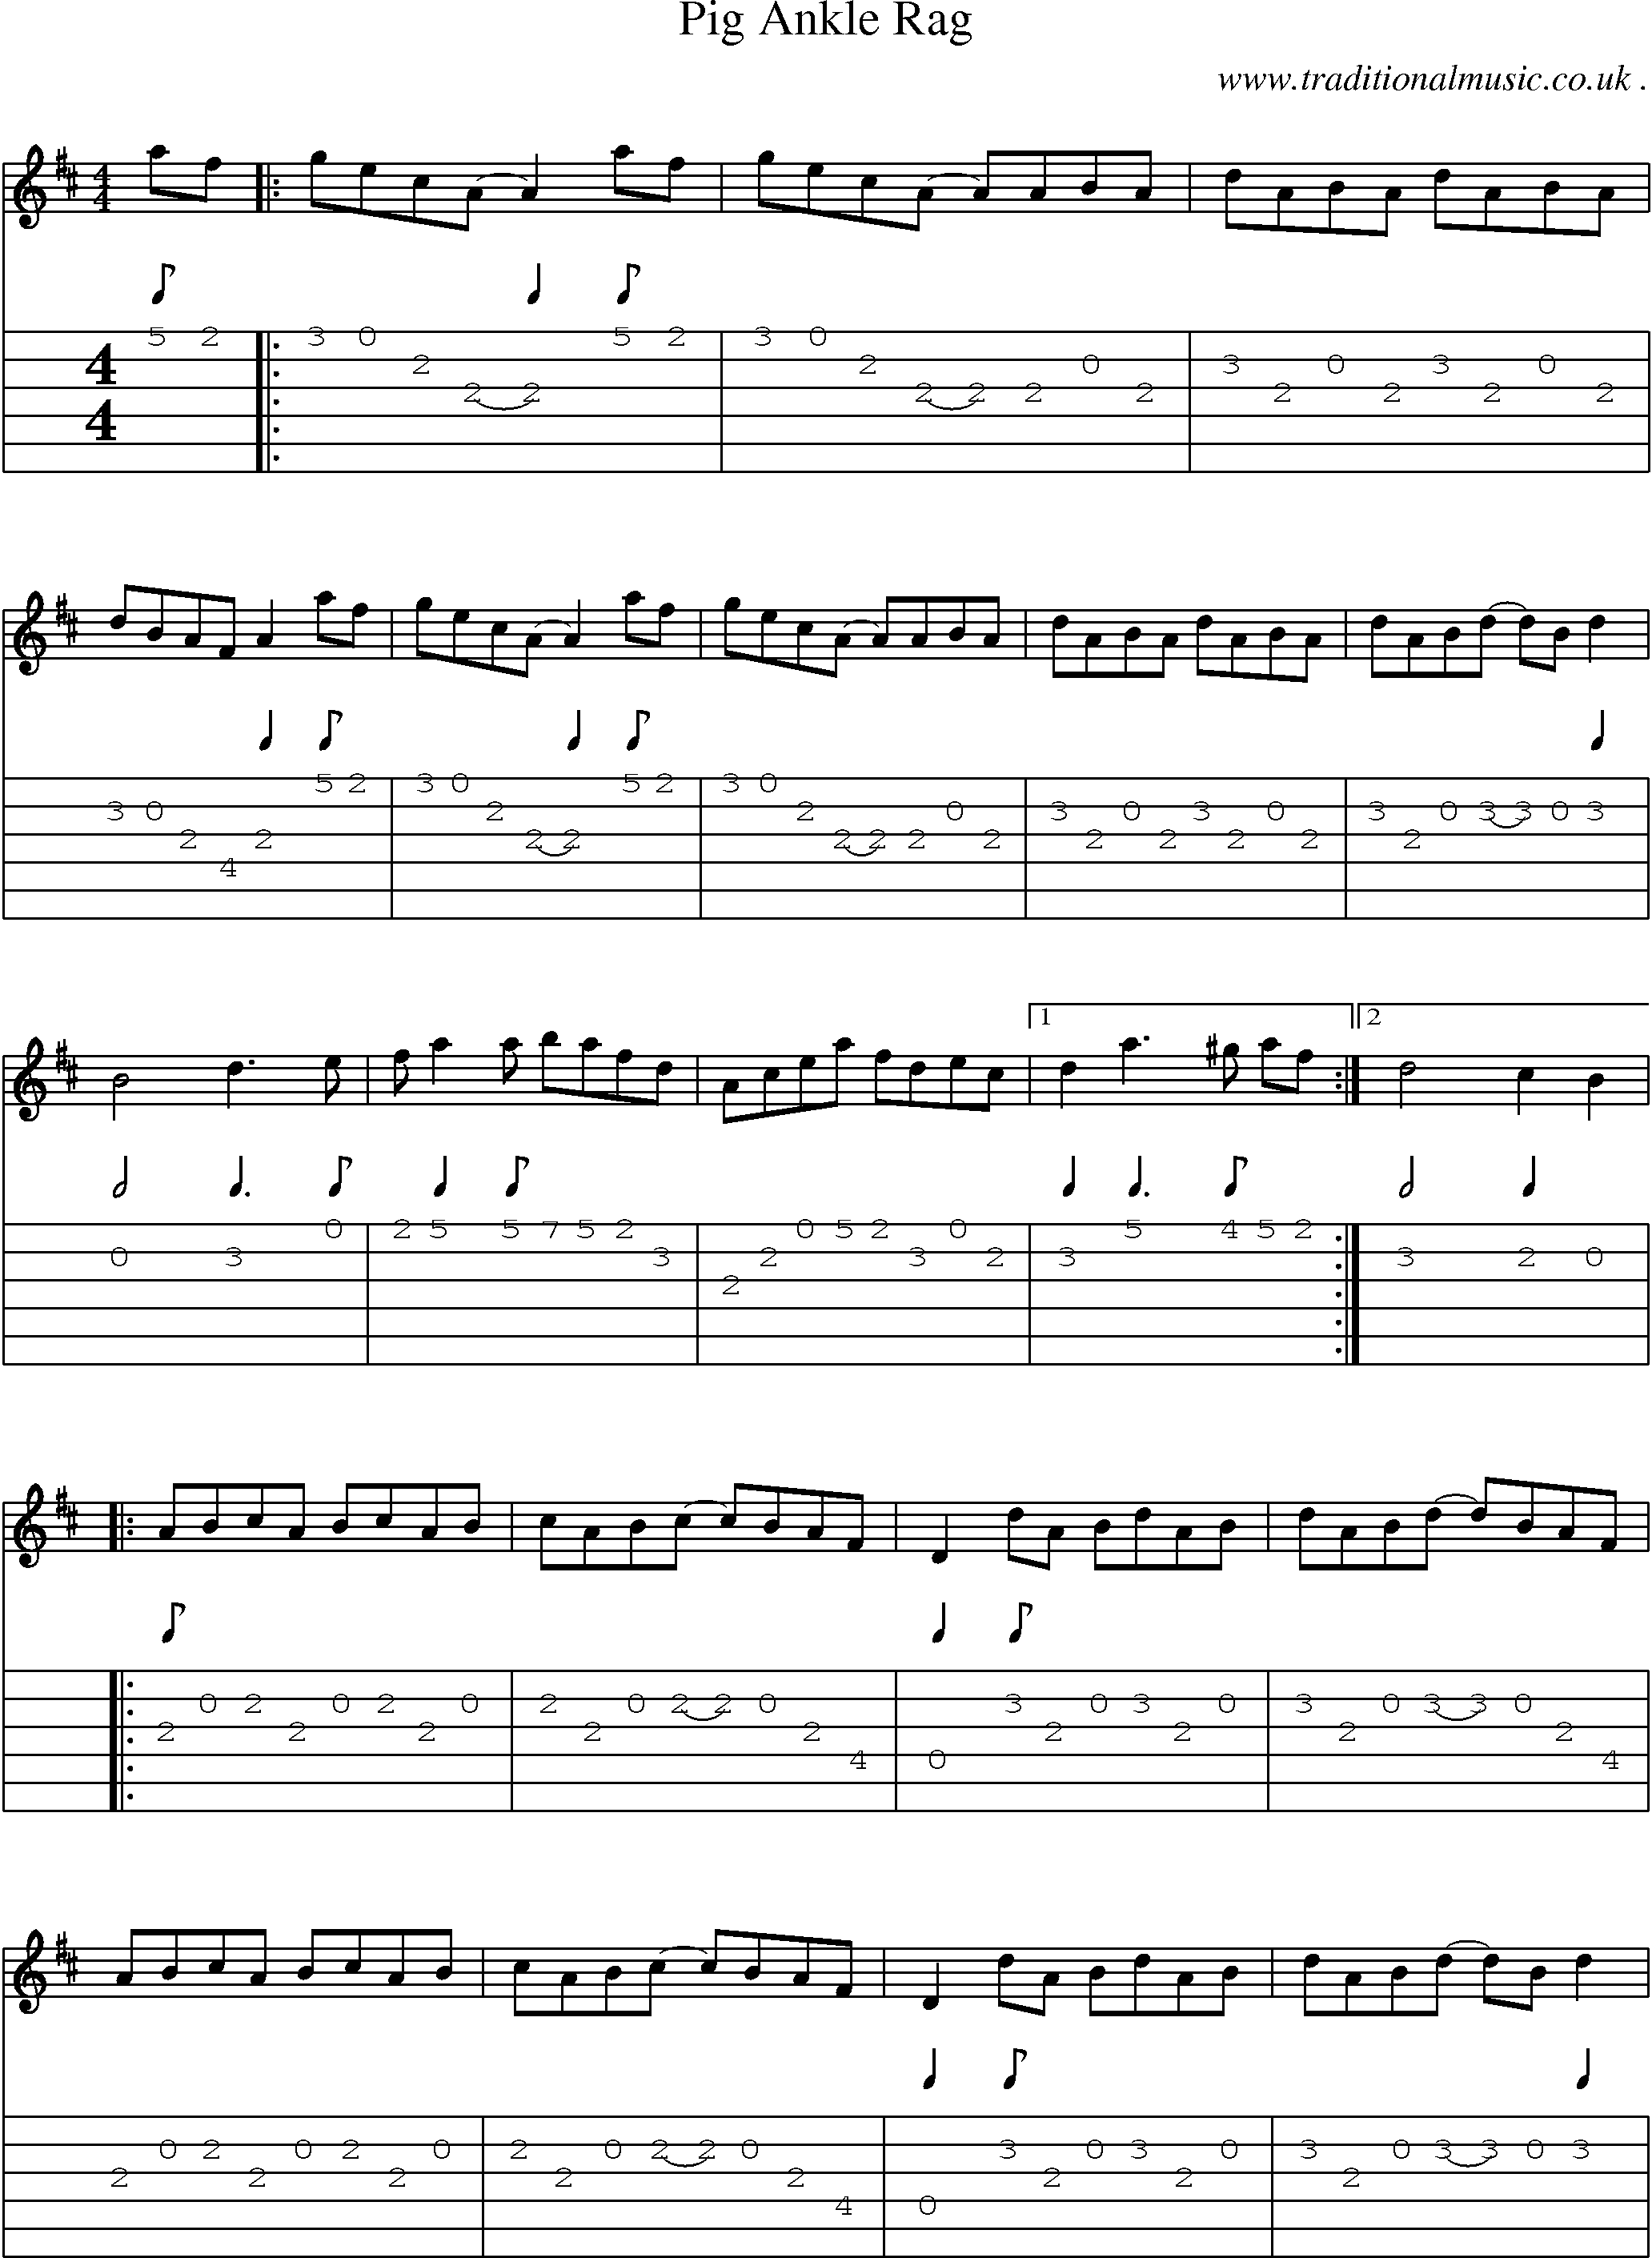 Music Score and Guitar Tabs for Pig Ankle Rag